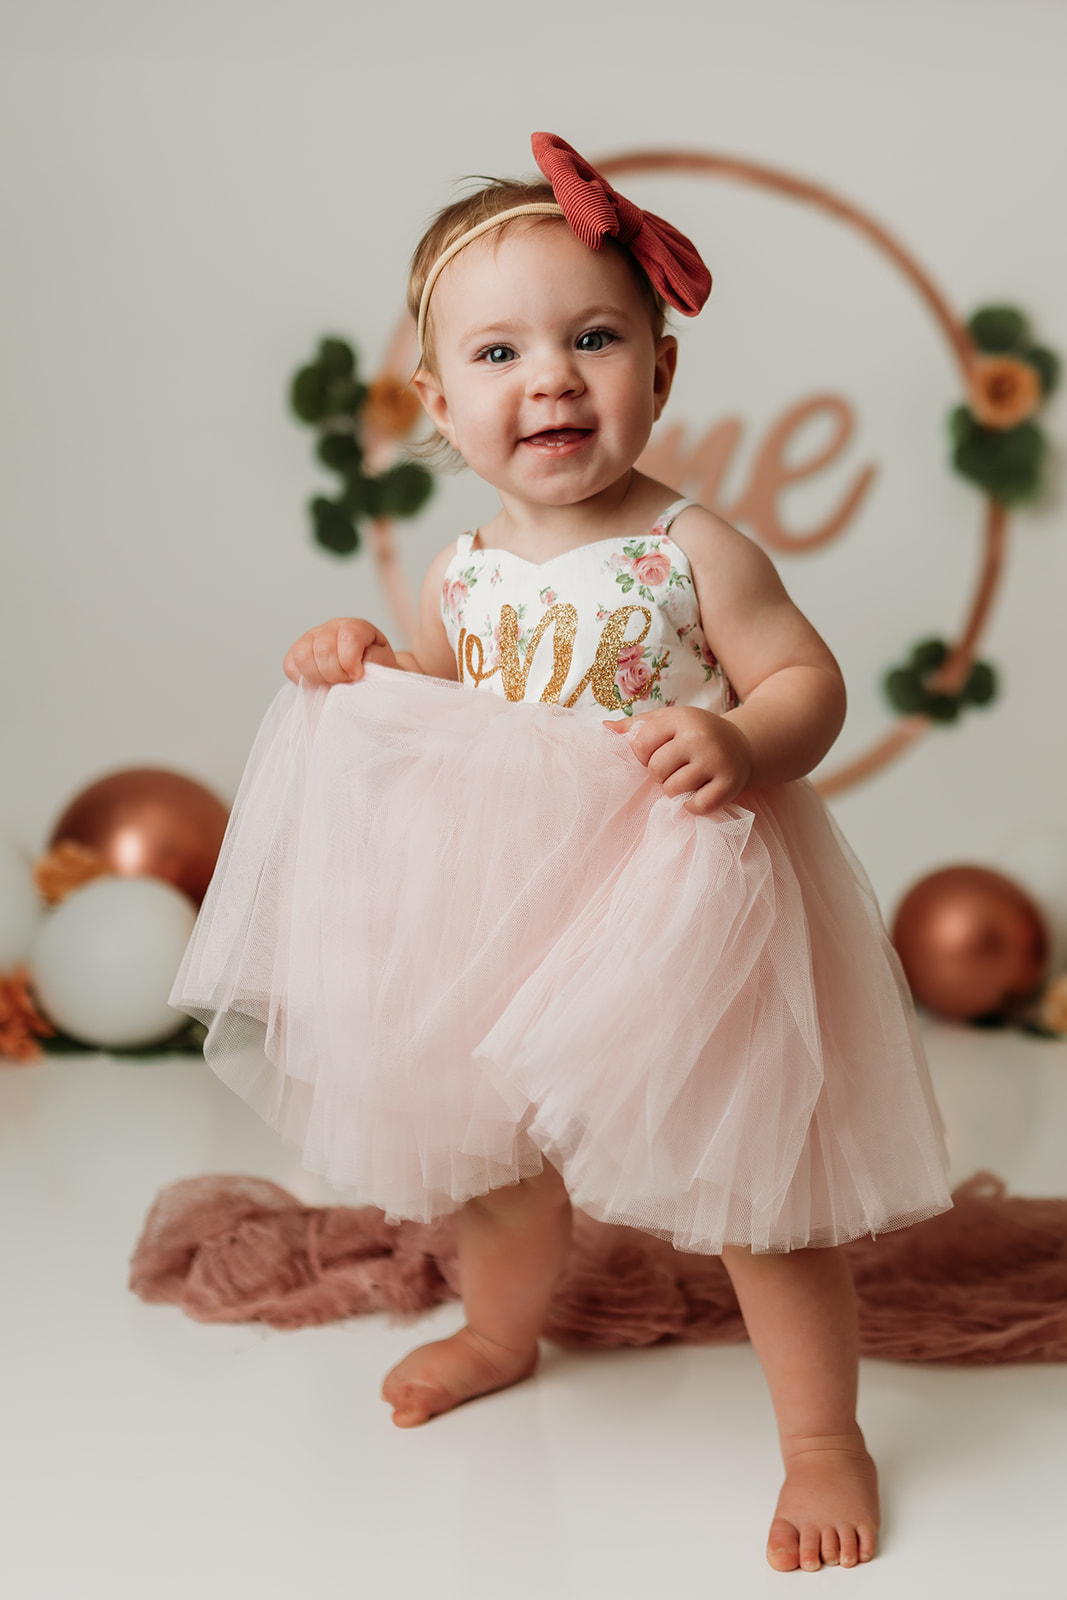 Timeless Cake Smash session with Heather Ann Photography